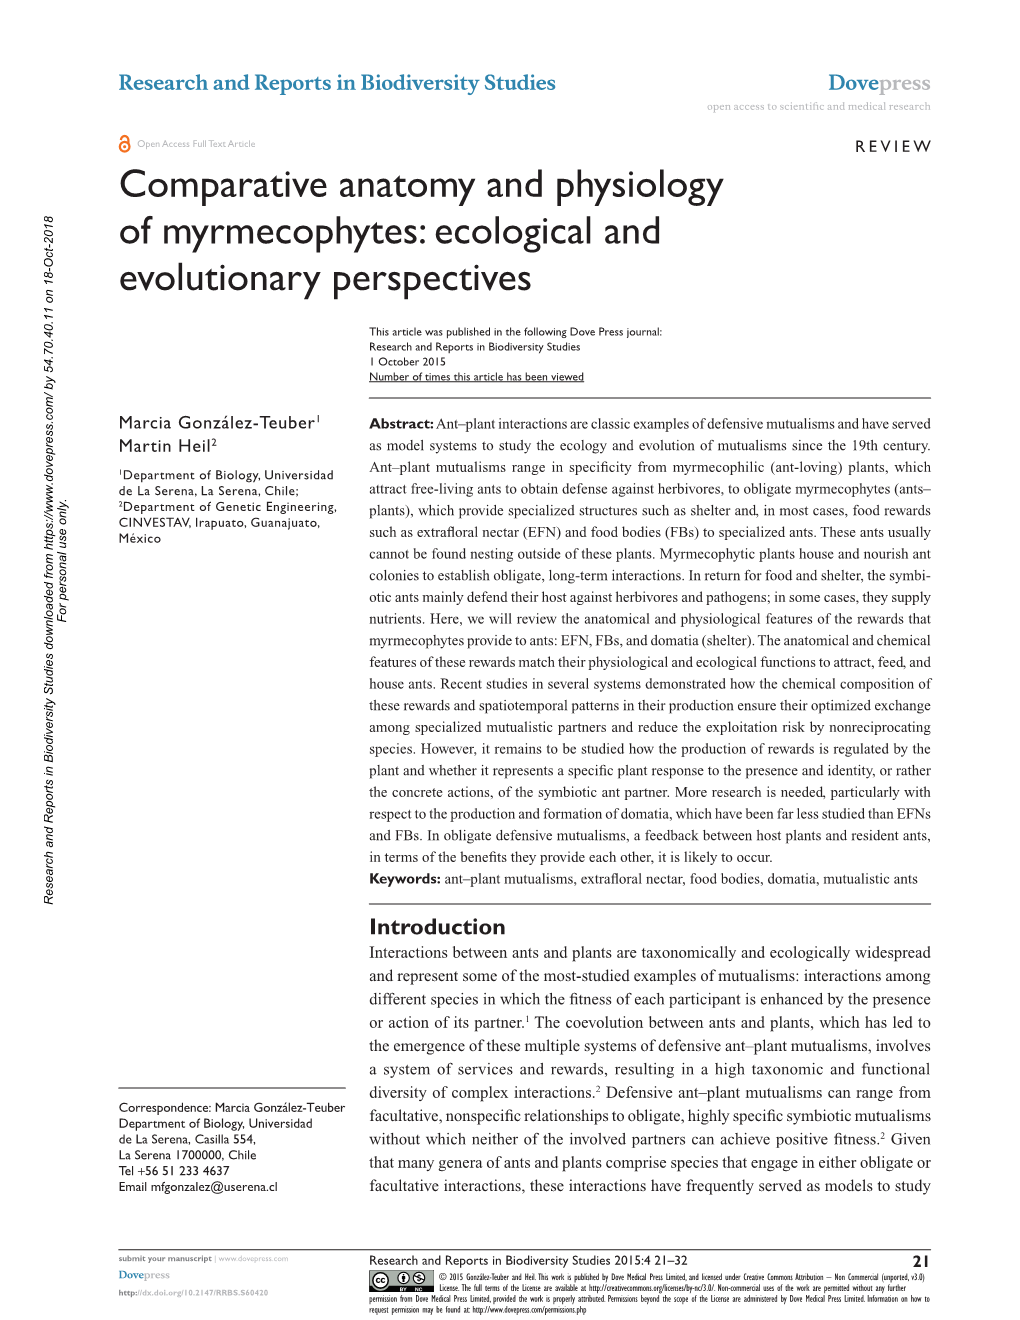 Comparative Anatomy and Physiology of Myrmecophytes: Ecological and Evolutionary Perspectives